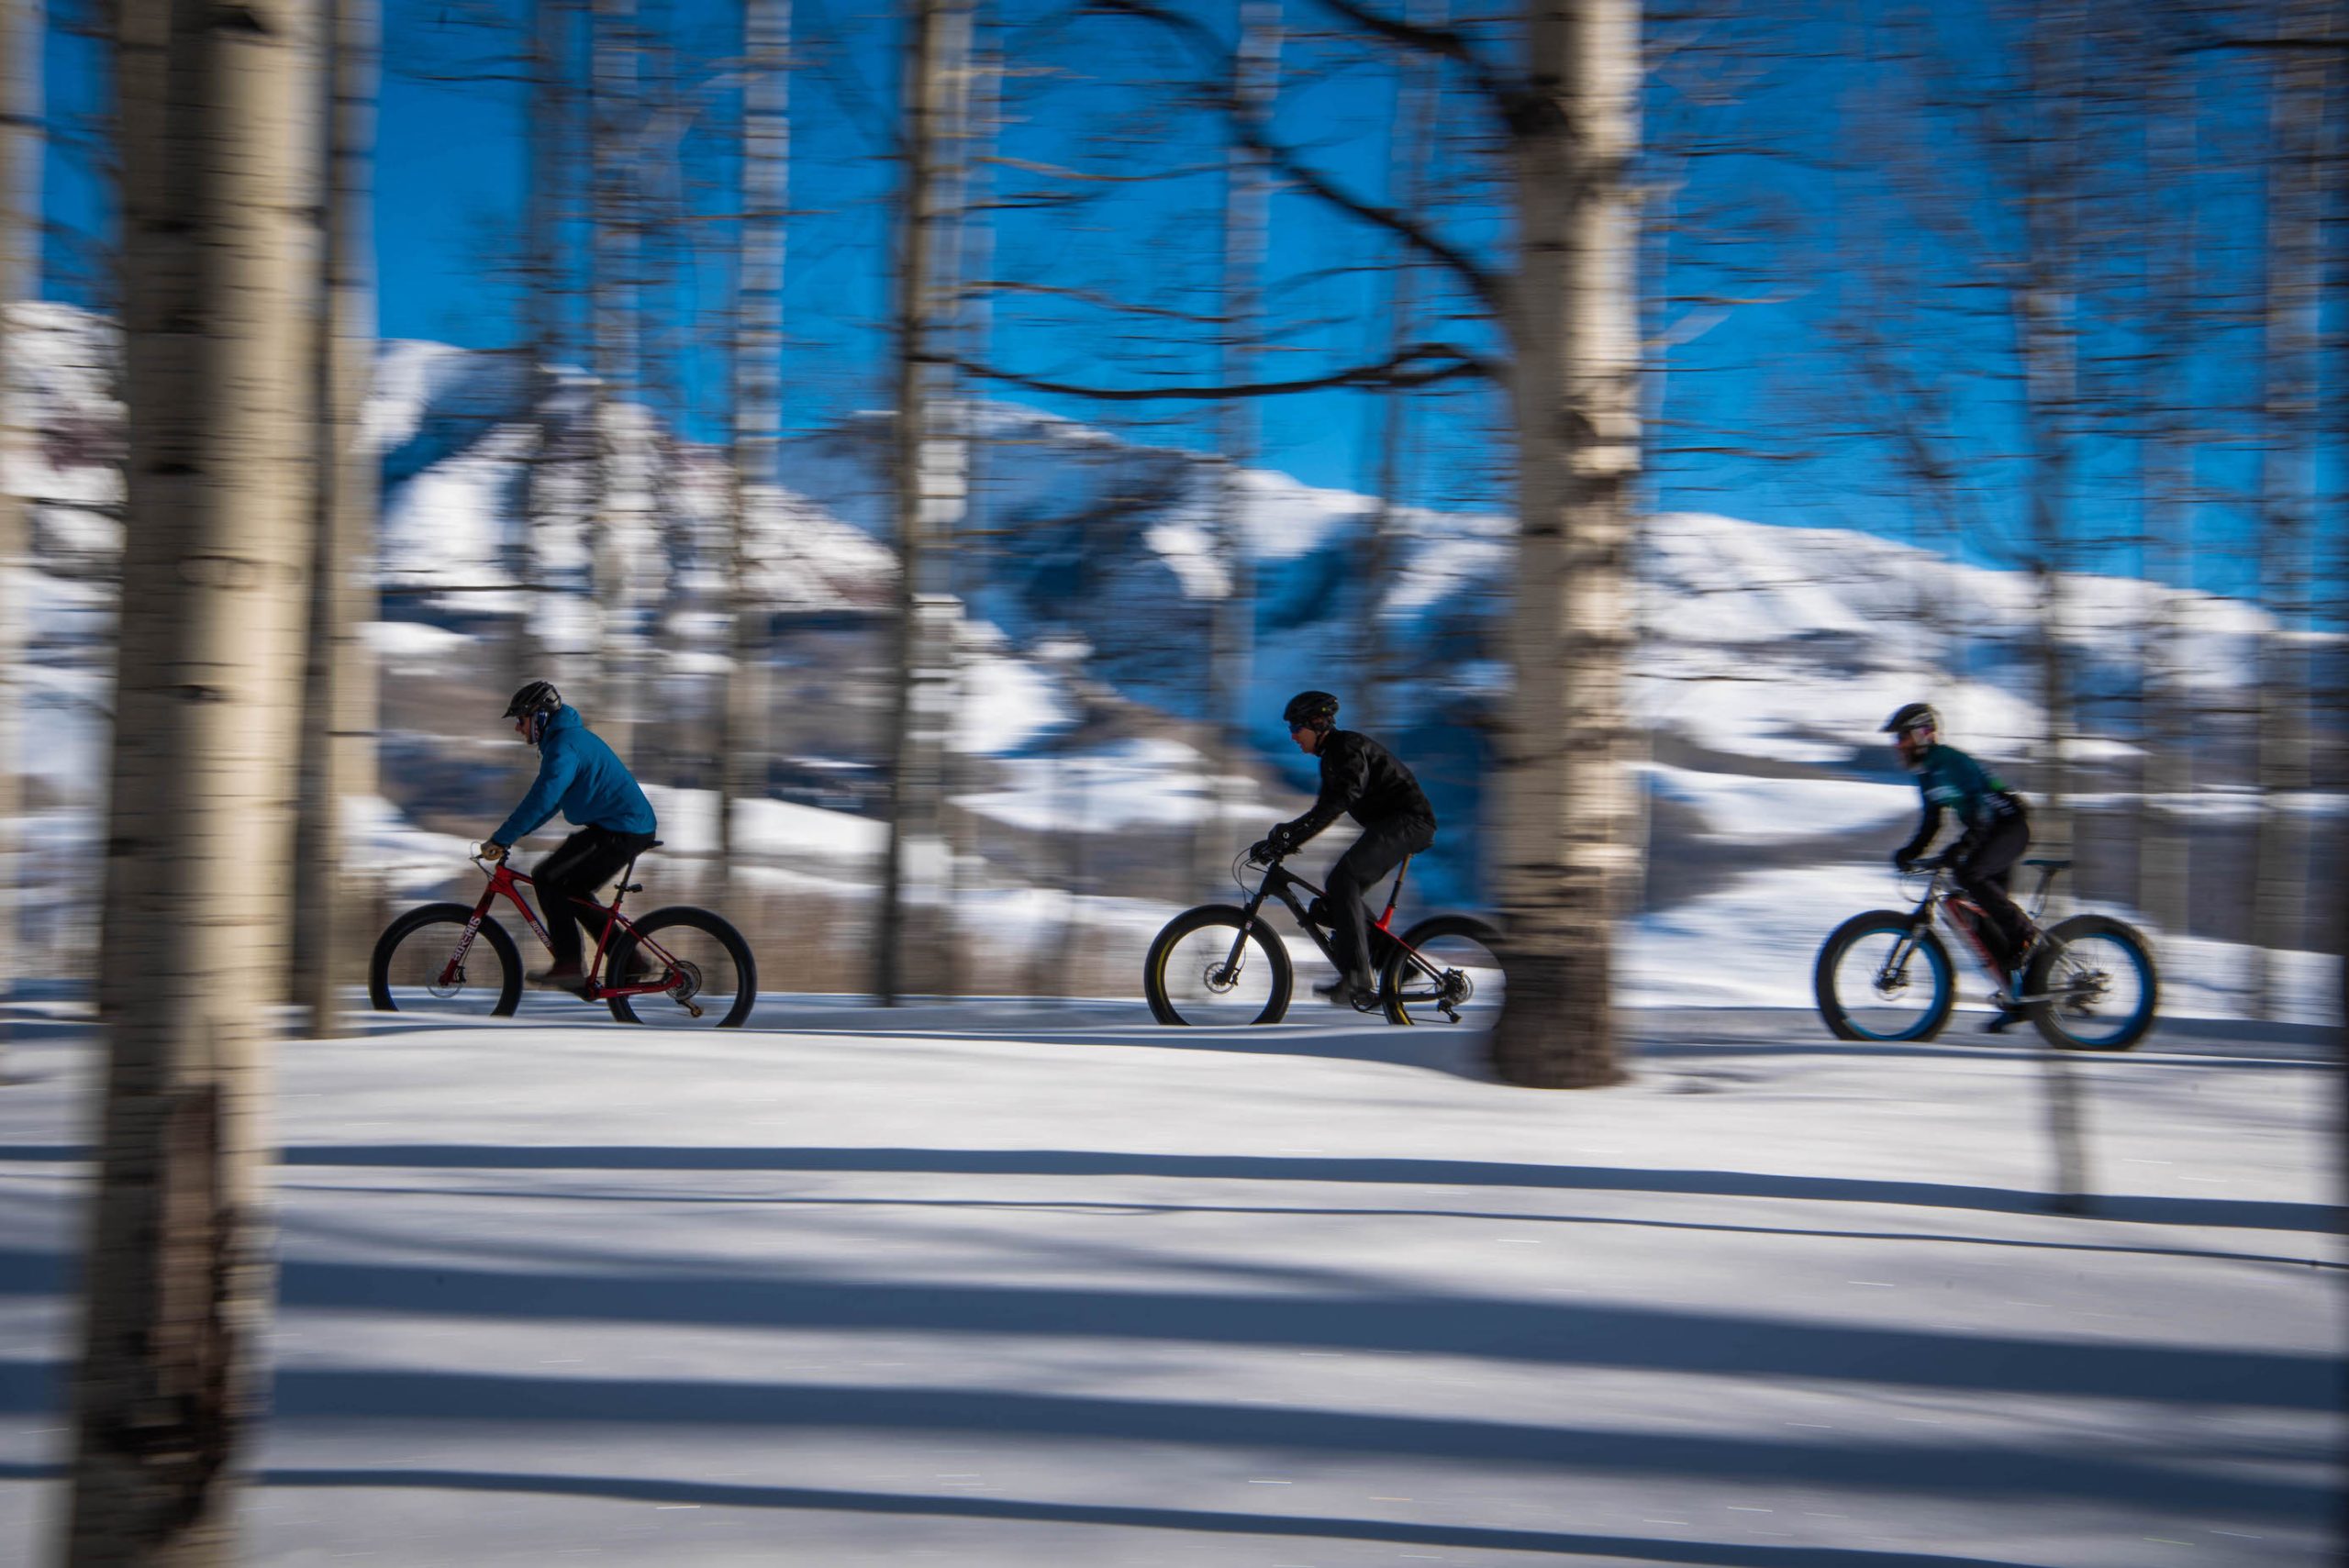 Three people riding fat bikes on a snowy trail in the woods